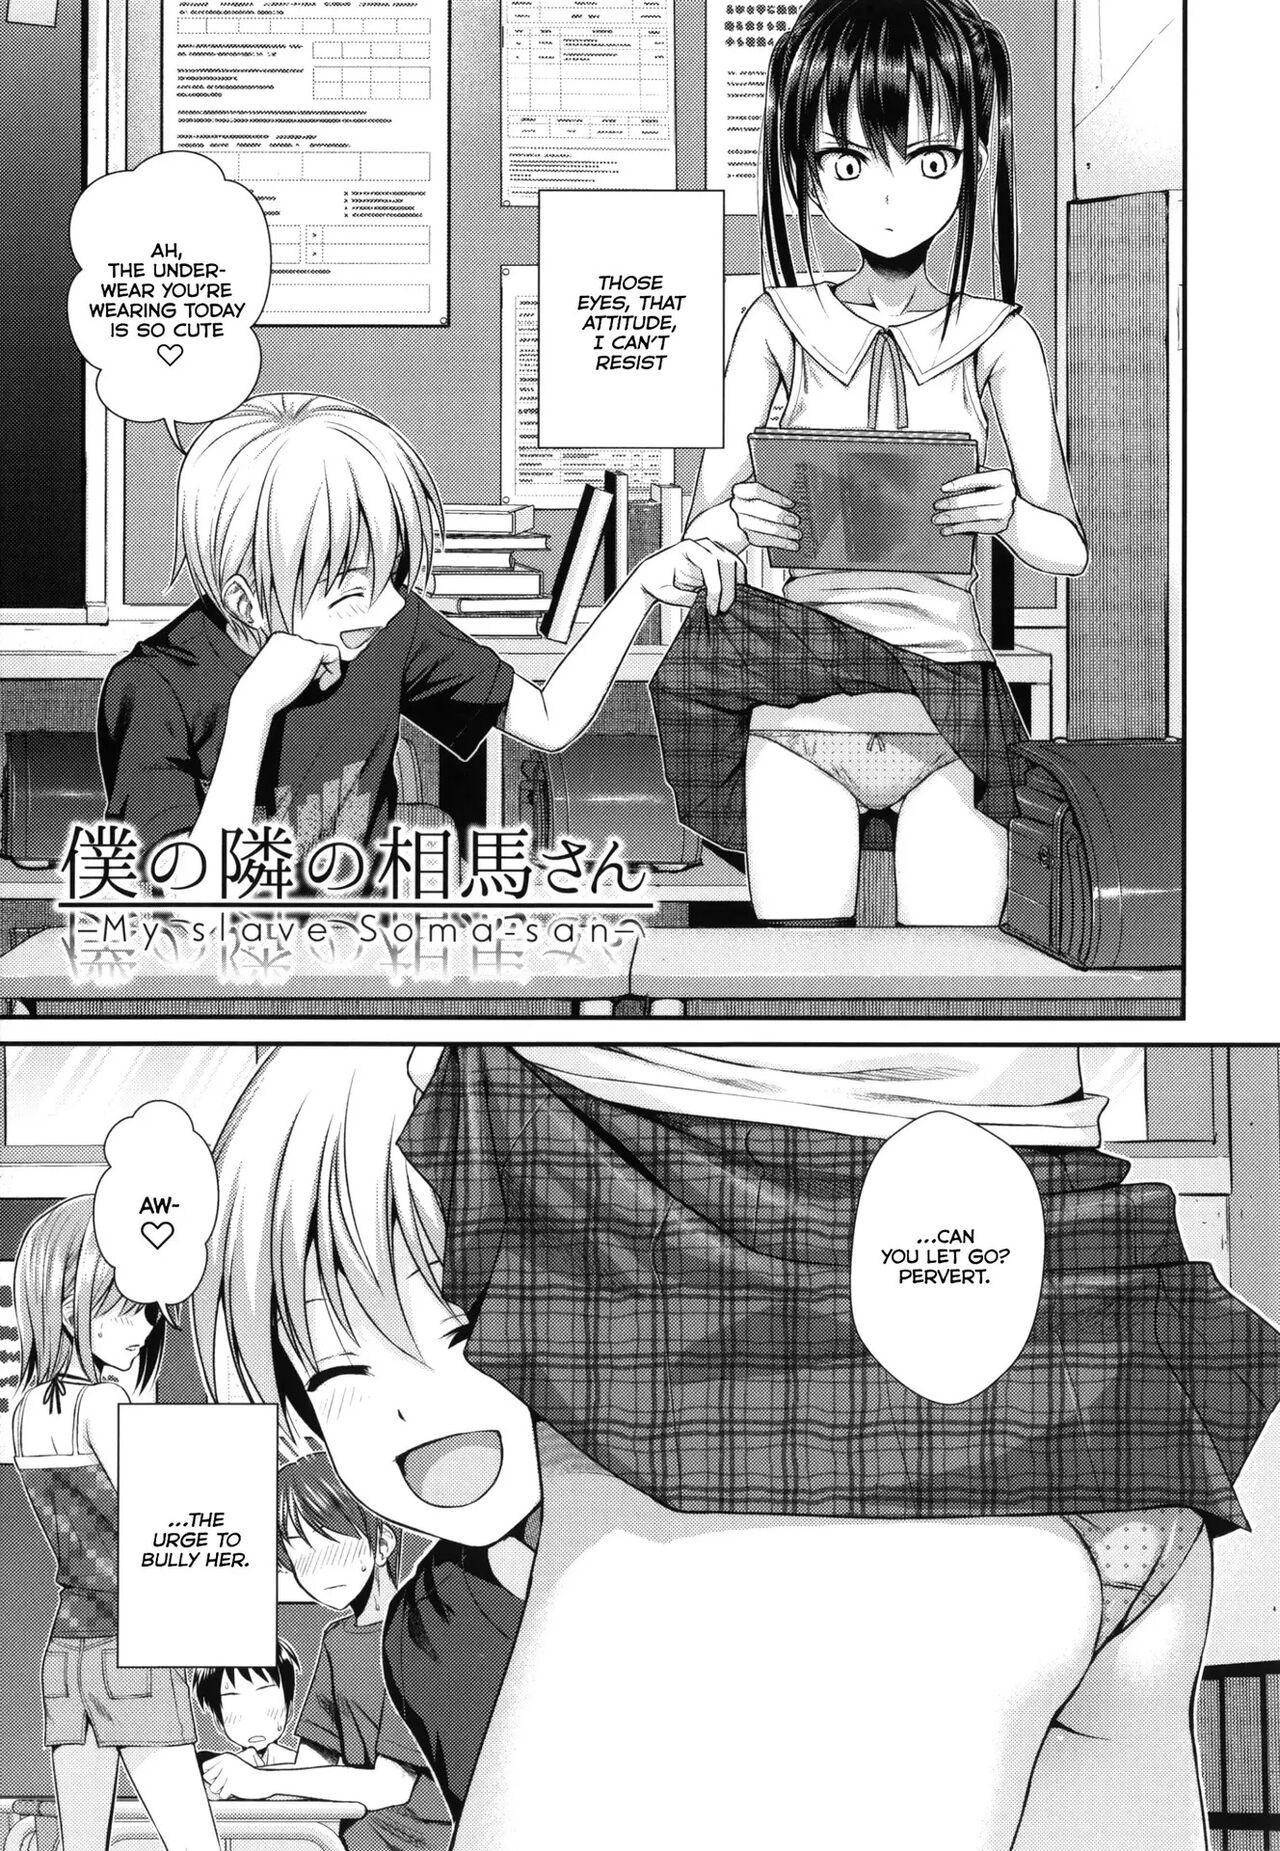 Caught My Slave Soma-san 1 Tight Ass - Page 3